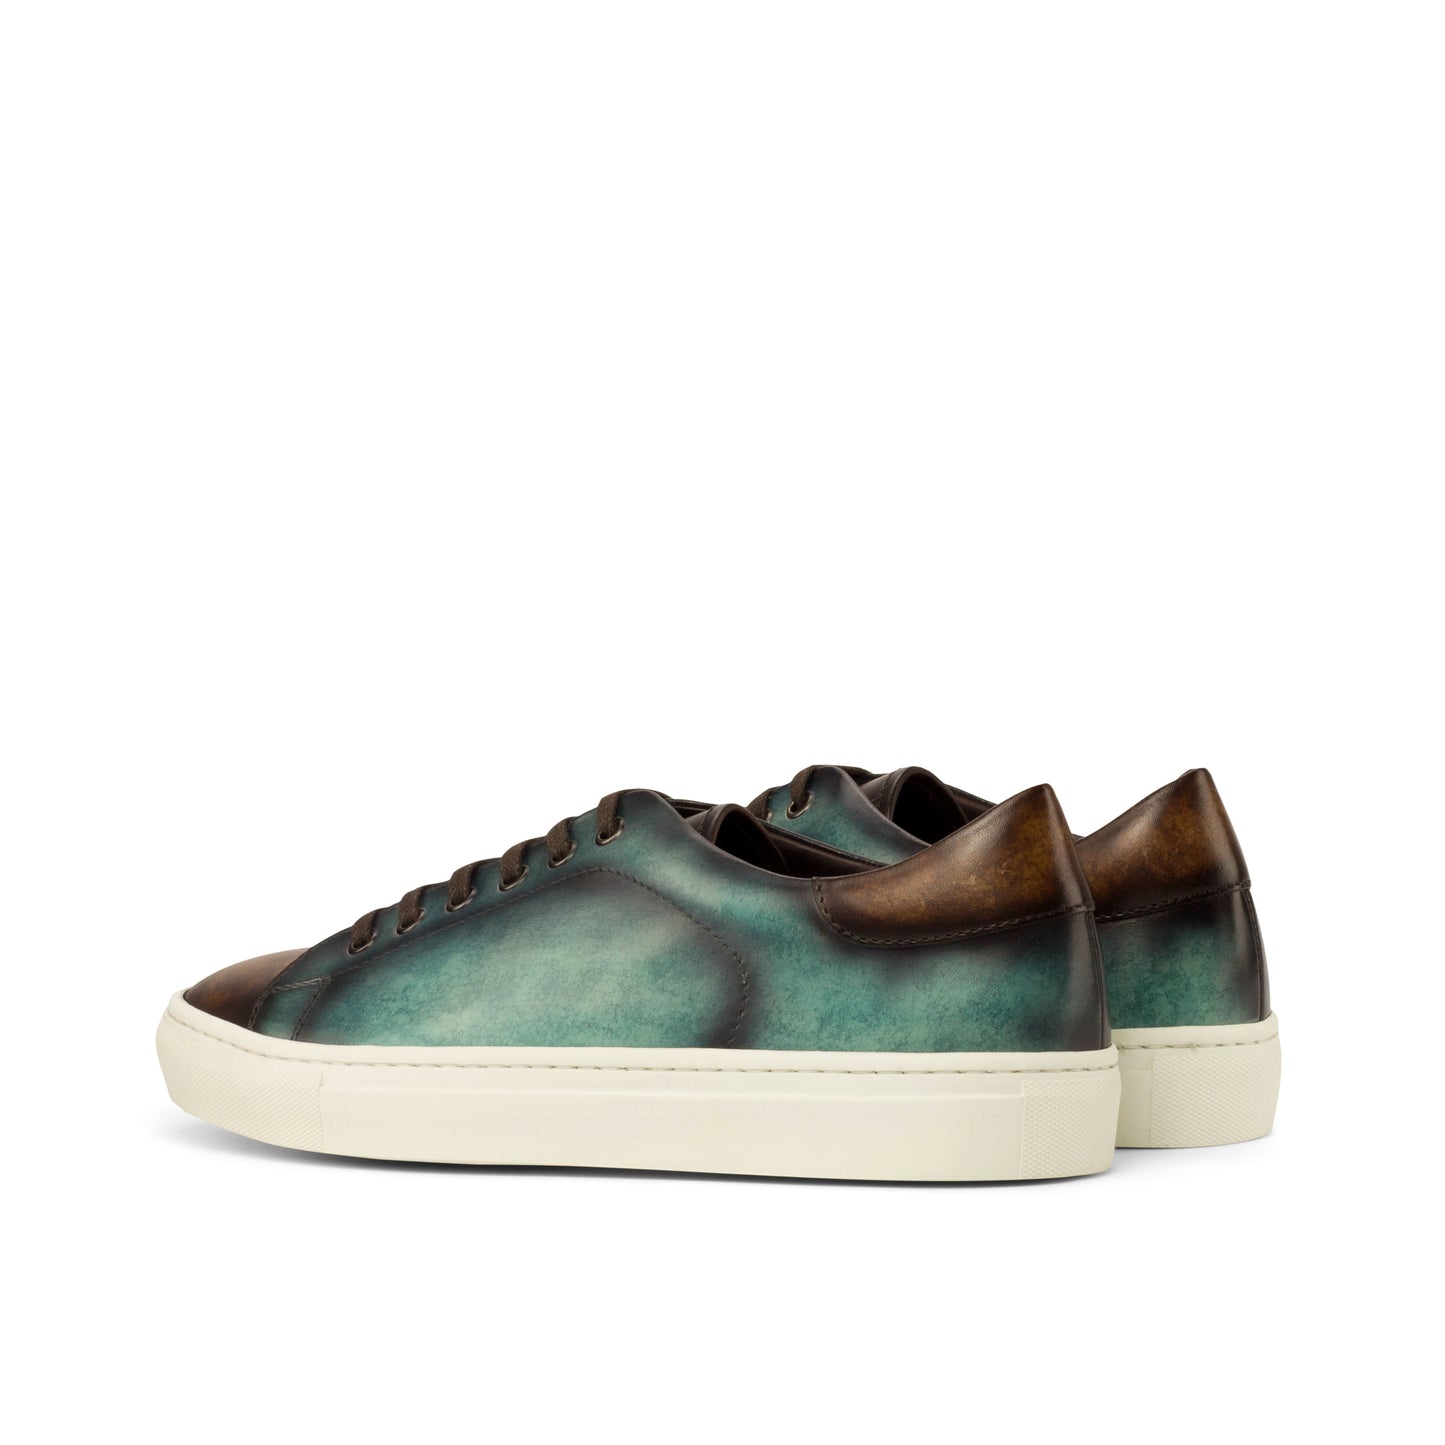 Sneakers Turquoise & brown marble patina leather